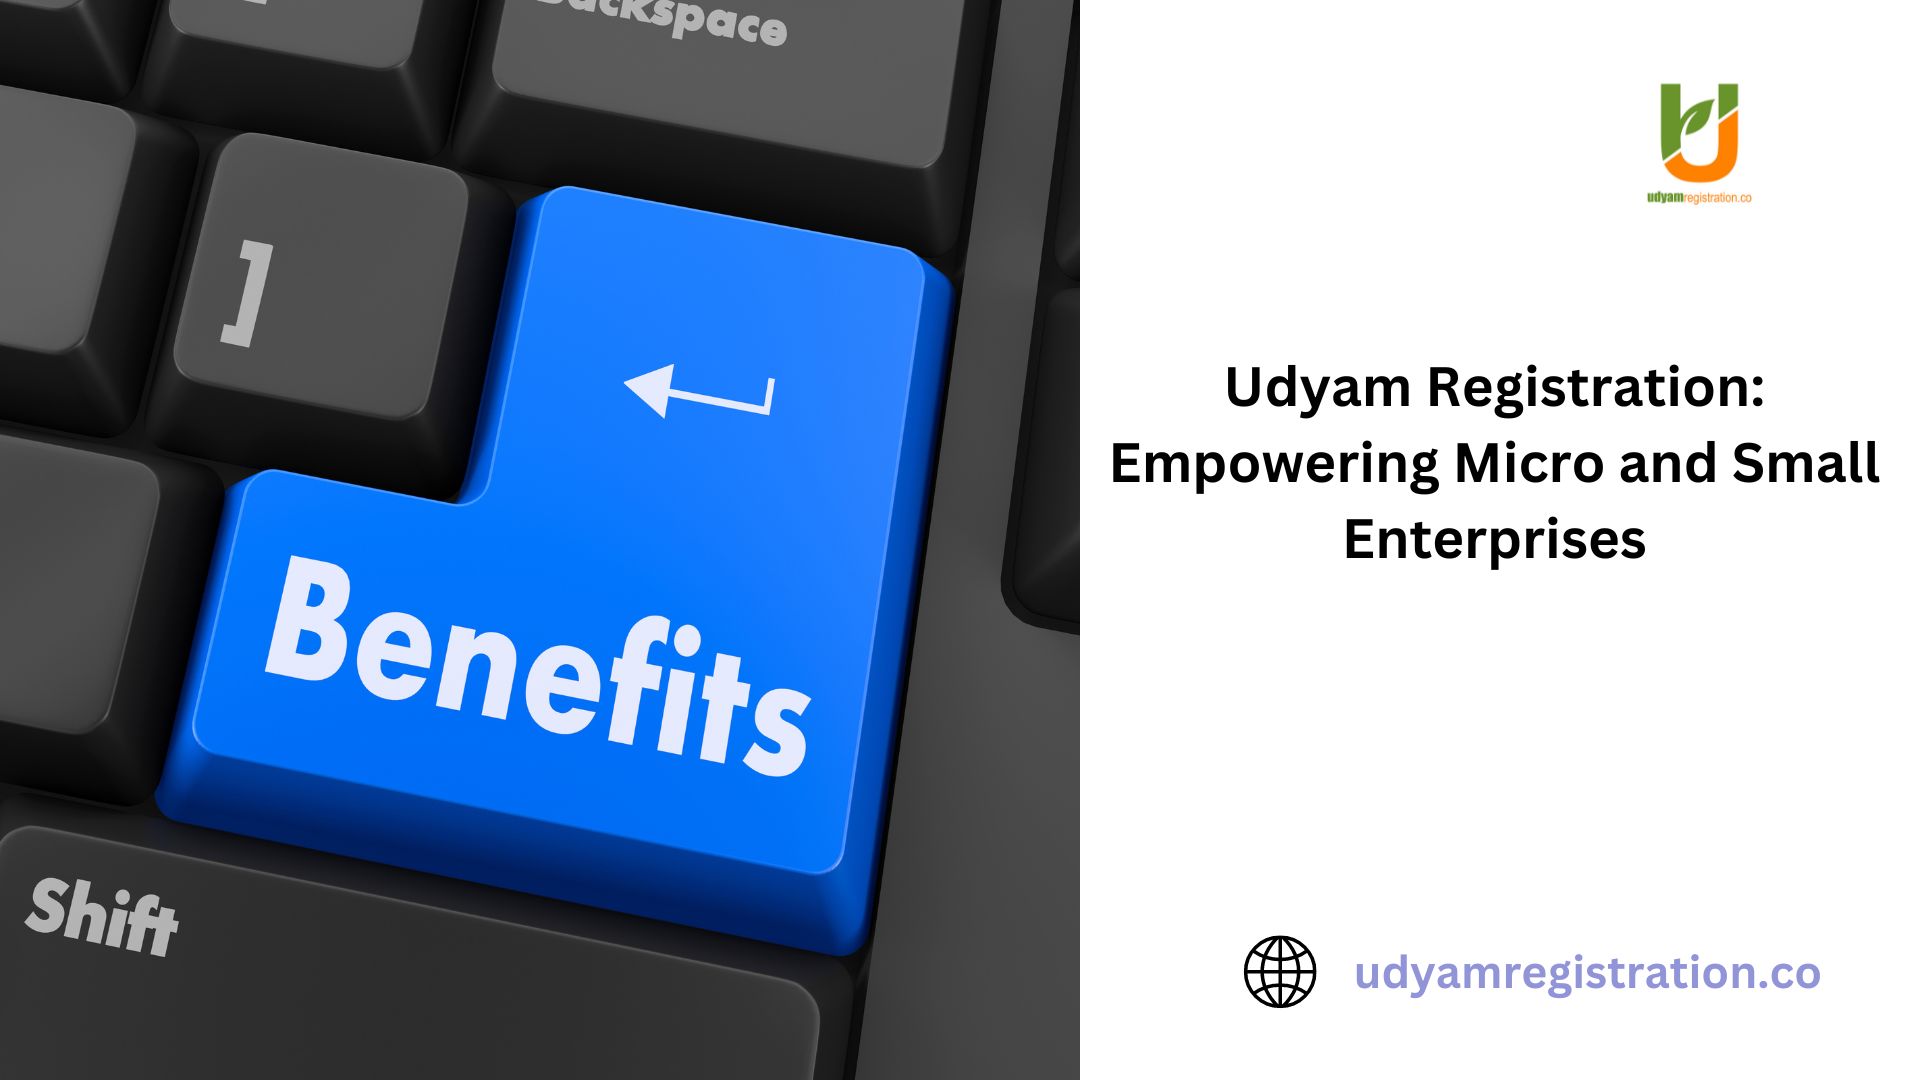 Udyam Registration: Empowering Micro and Small Enterprises